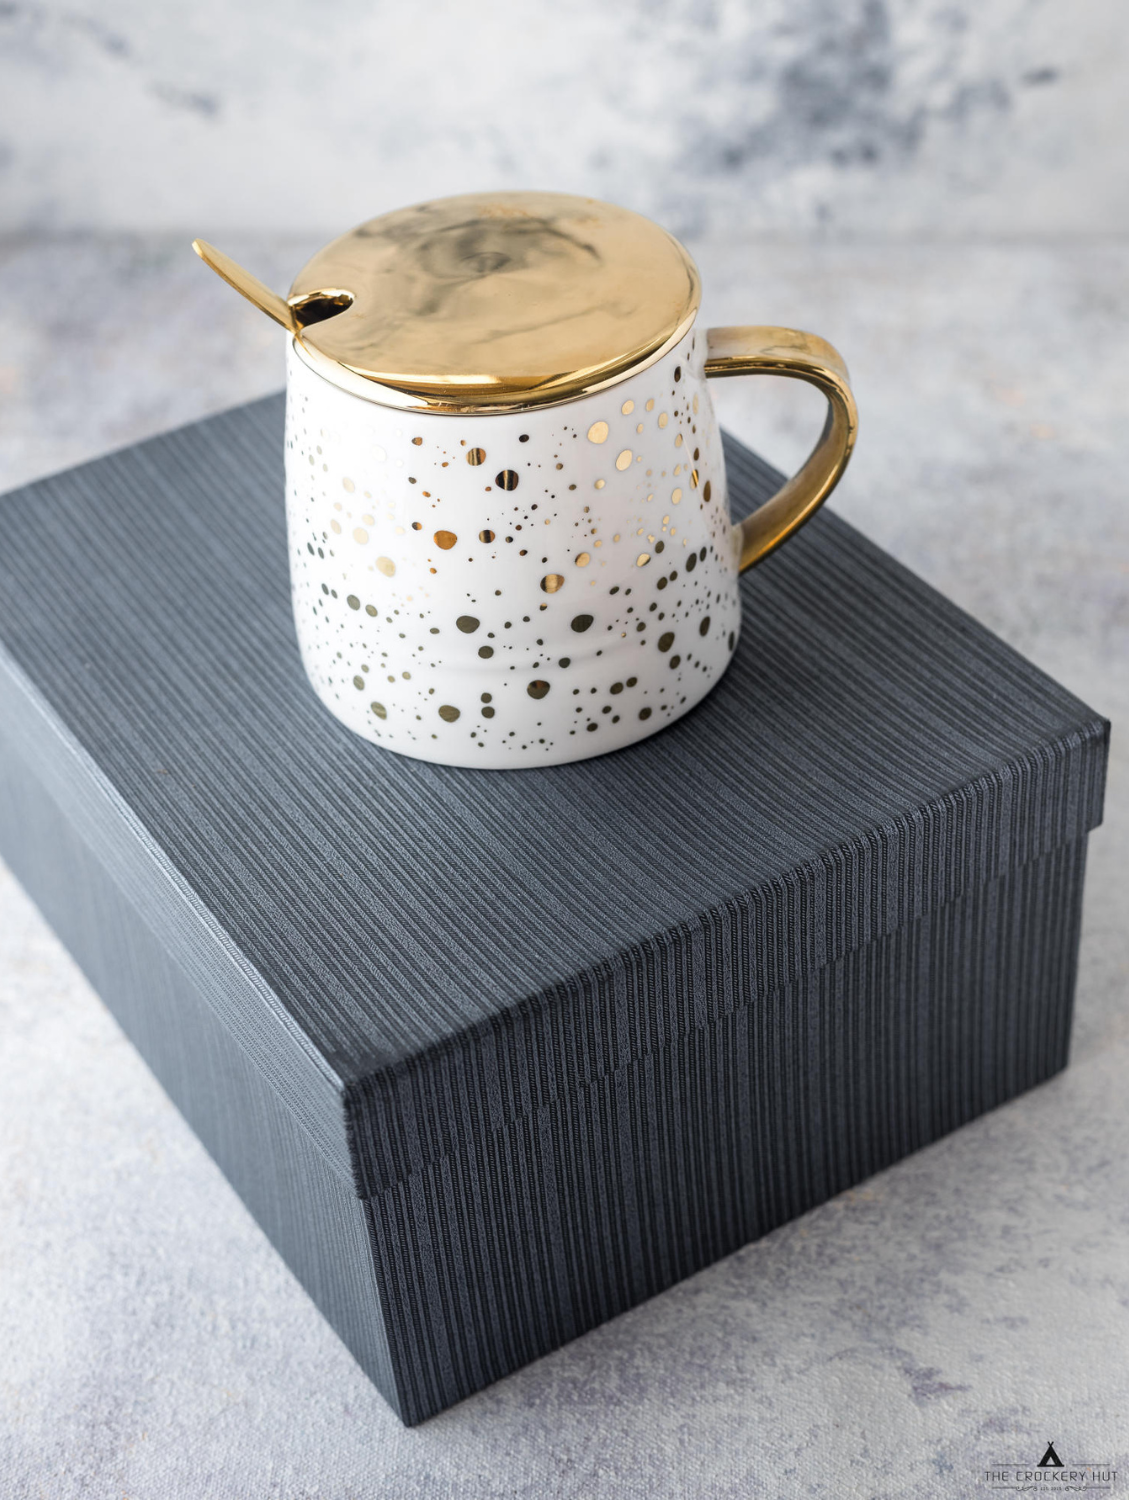 GOLD POLKA Dot Cup With Lid And Spoon